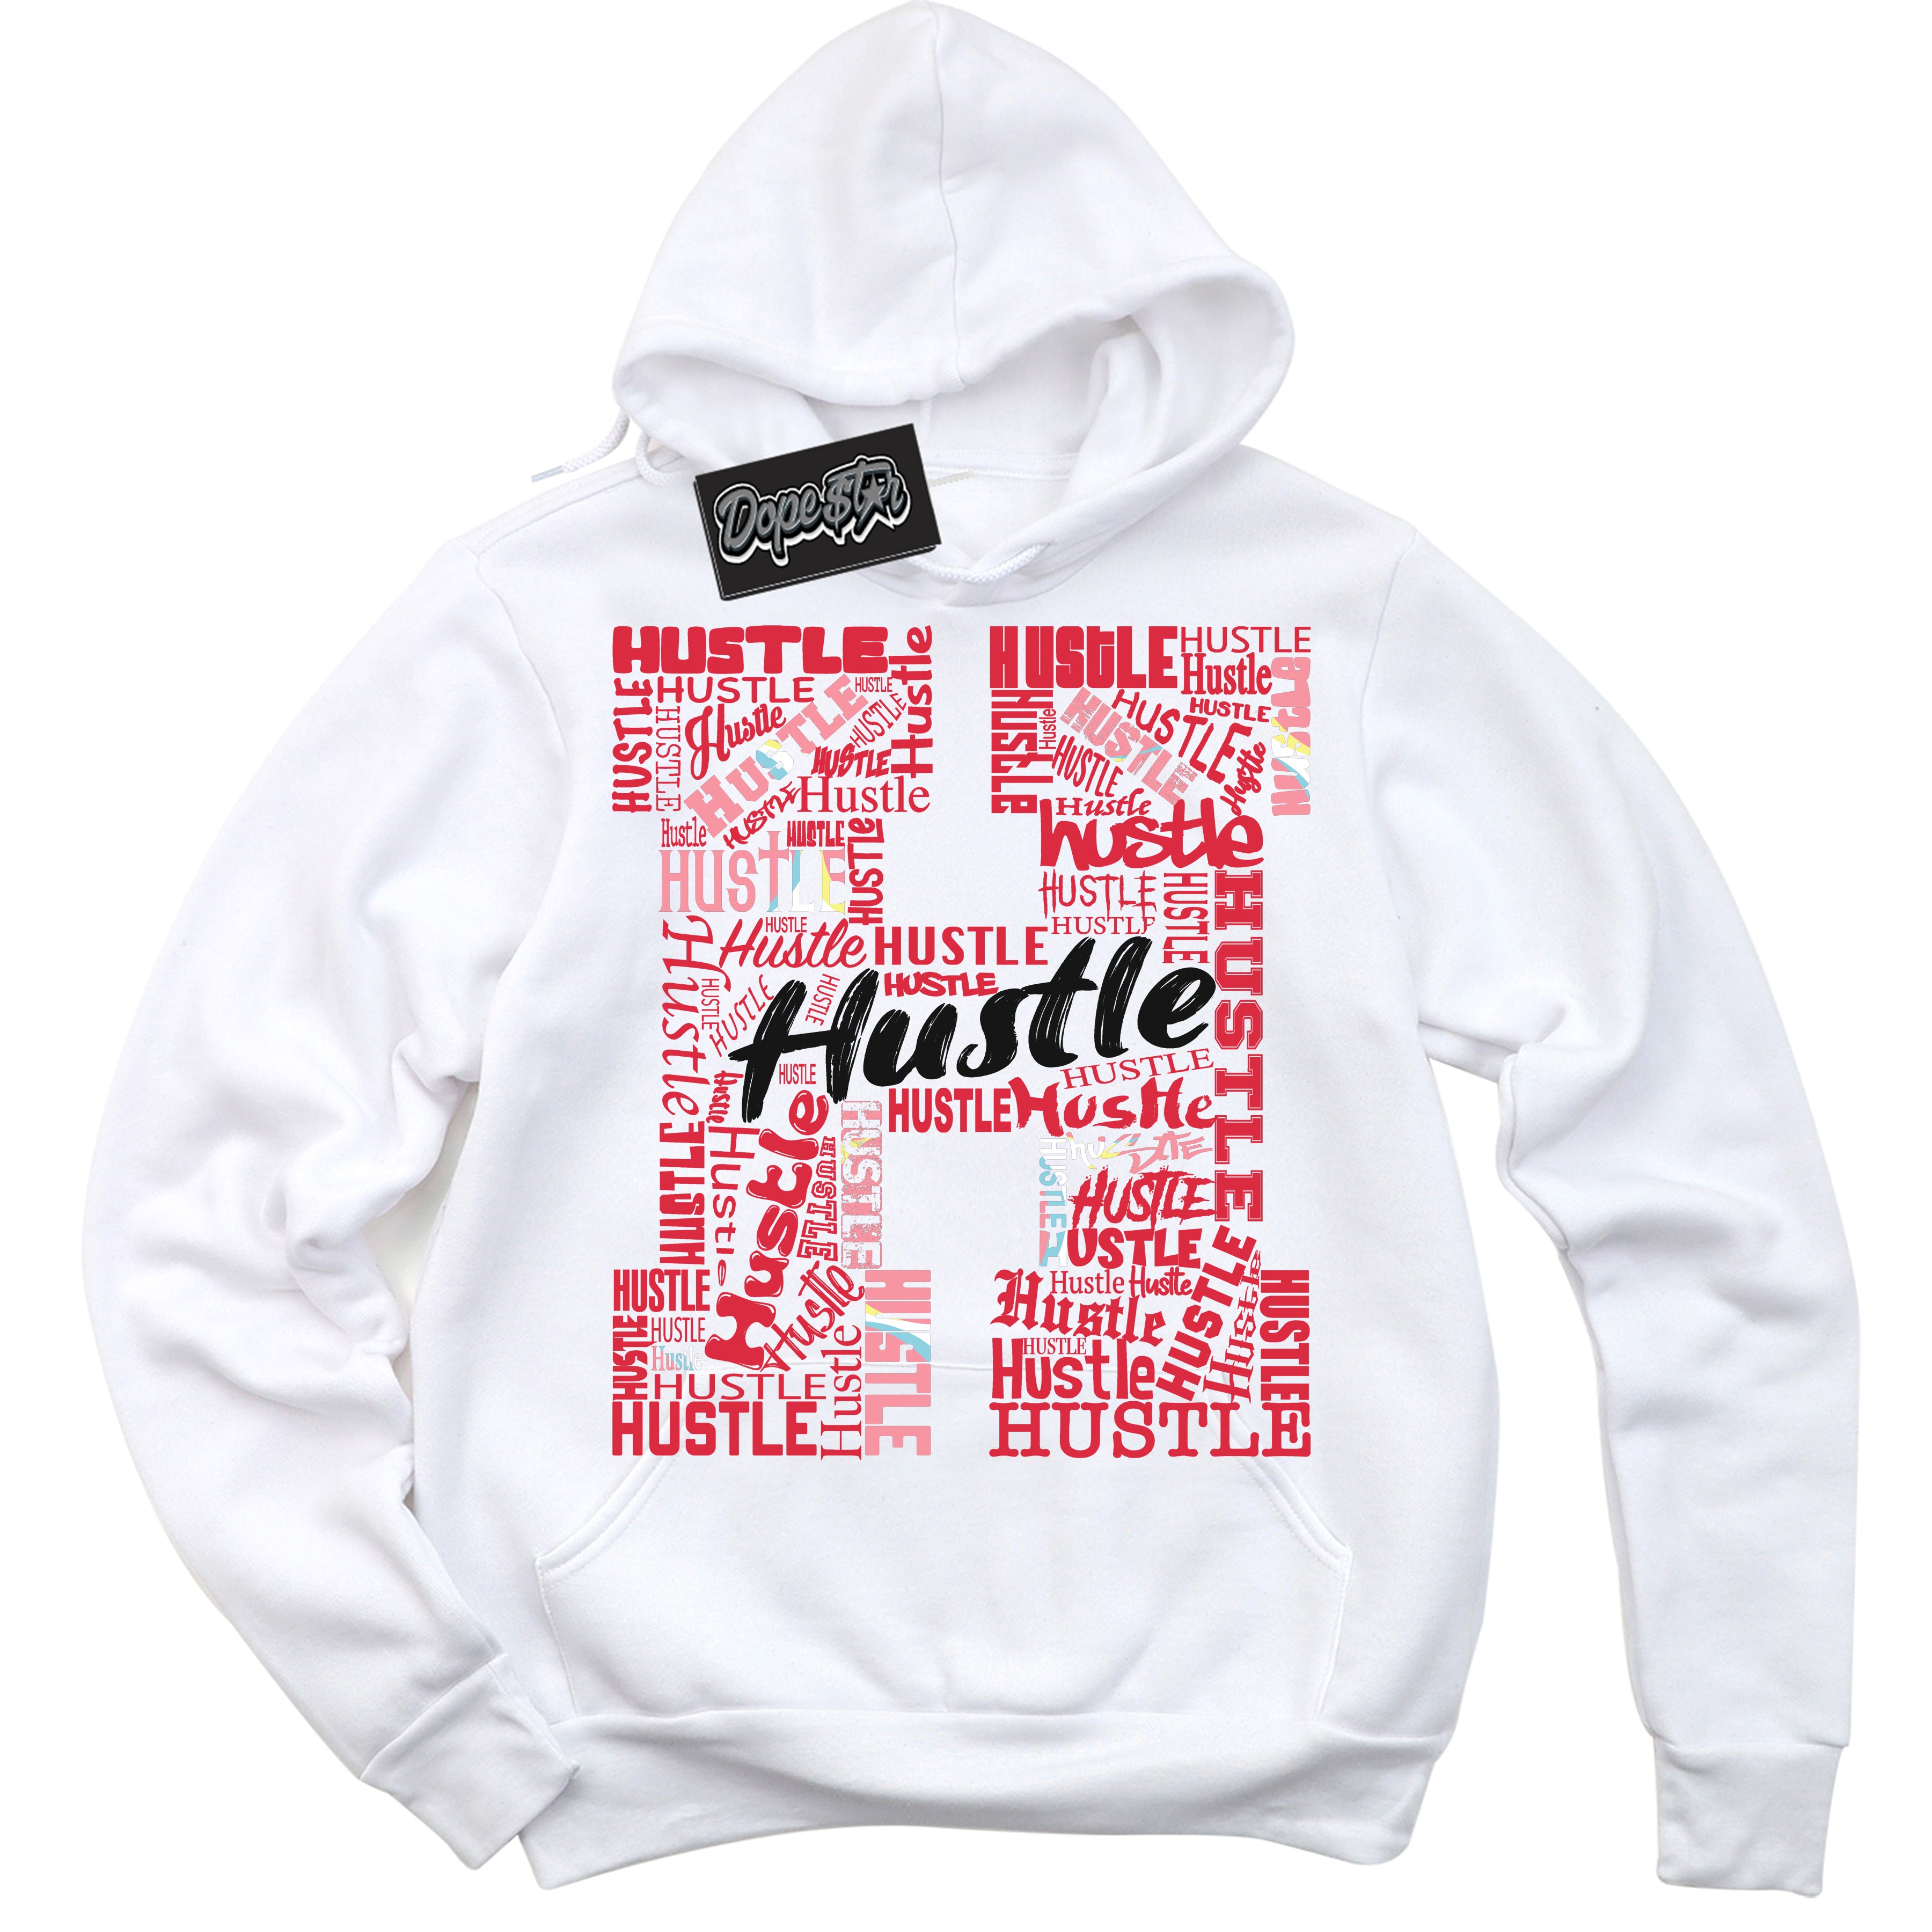 Cool White Graphic DopeStar Hoodie with “ Hustle H “ print, that perfectly matches Spider-Verse 1s sneakers